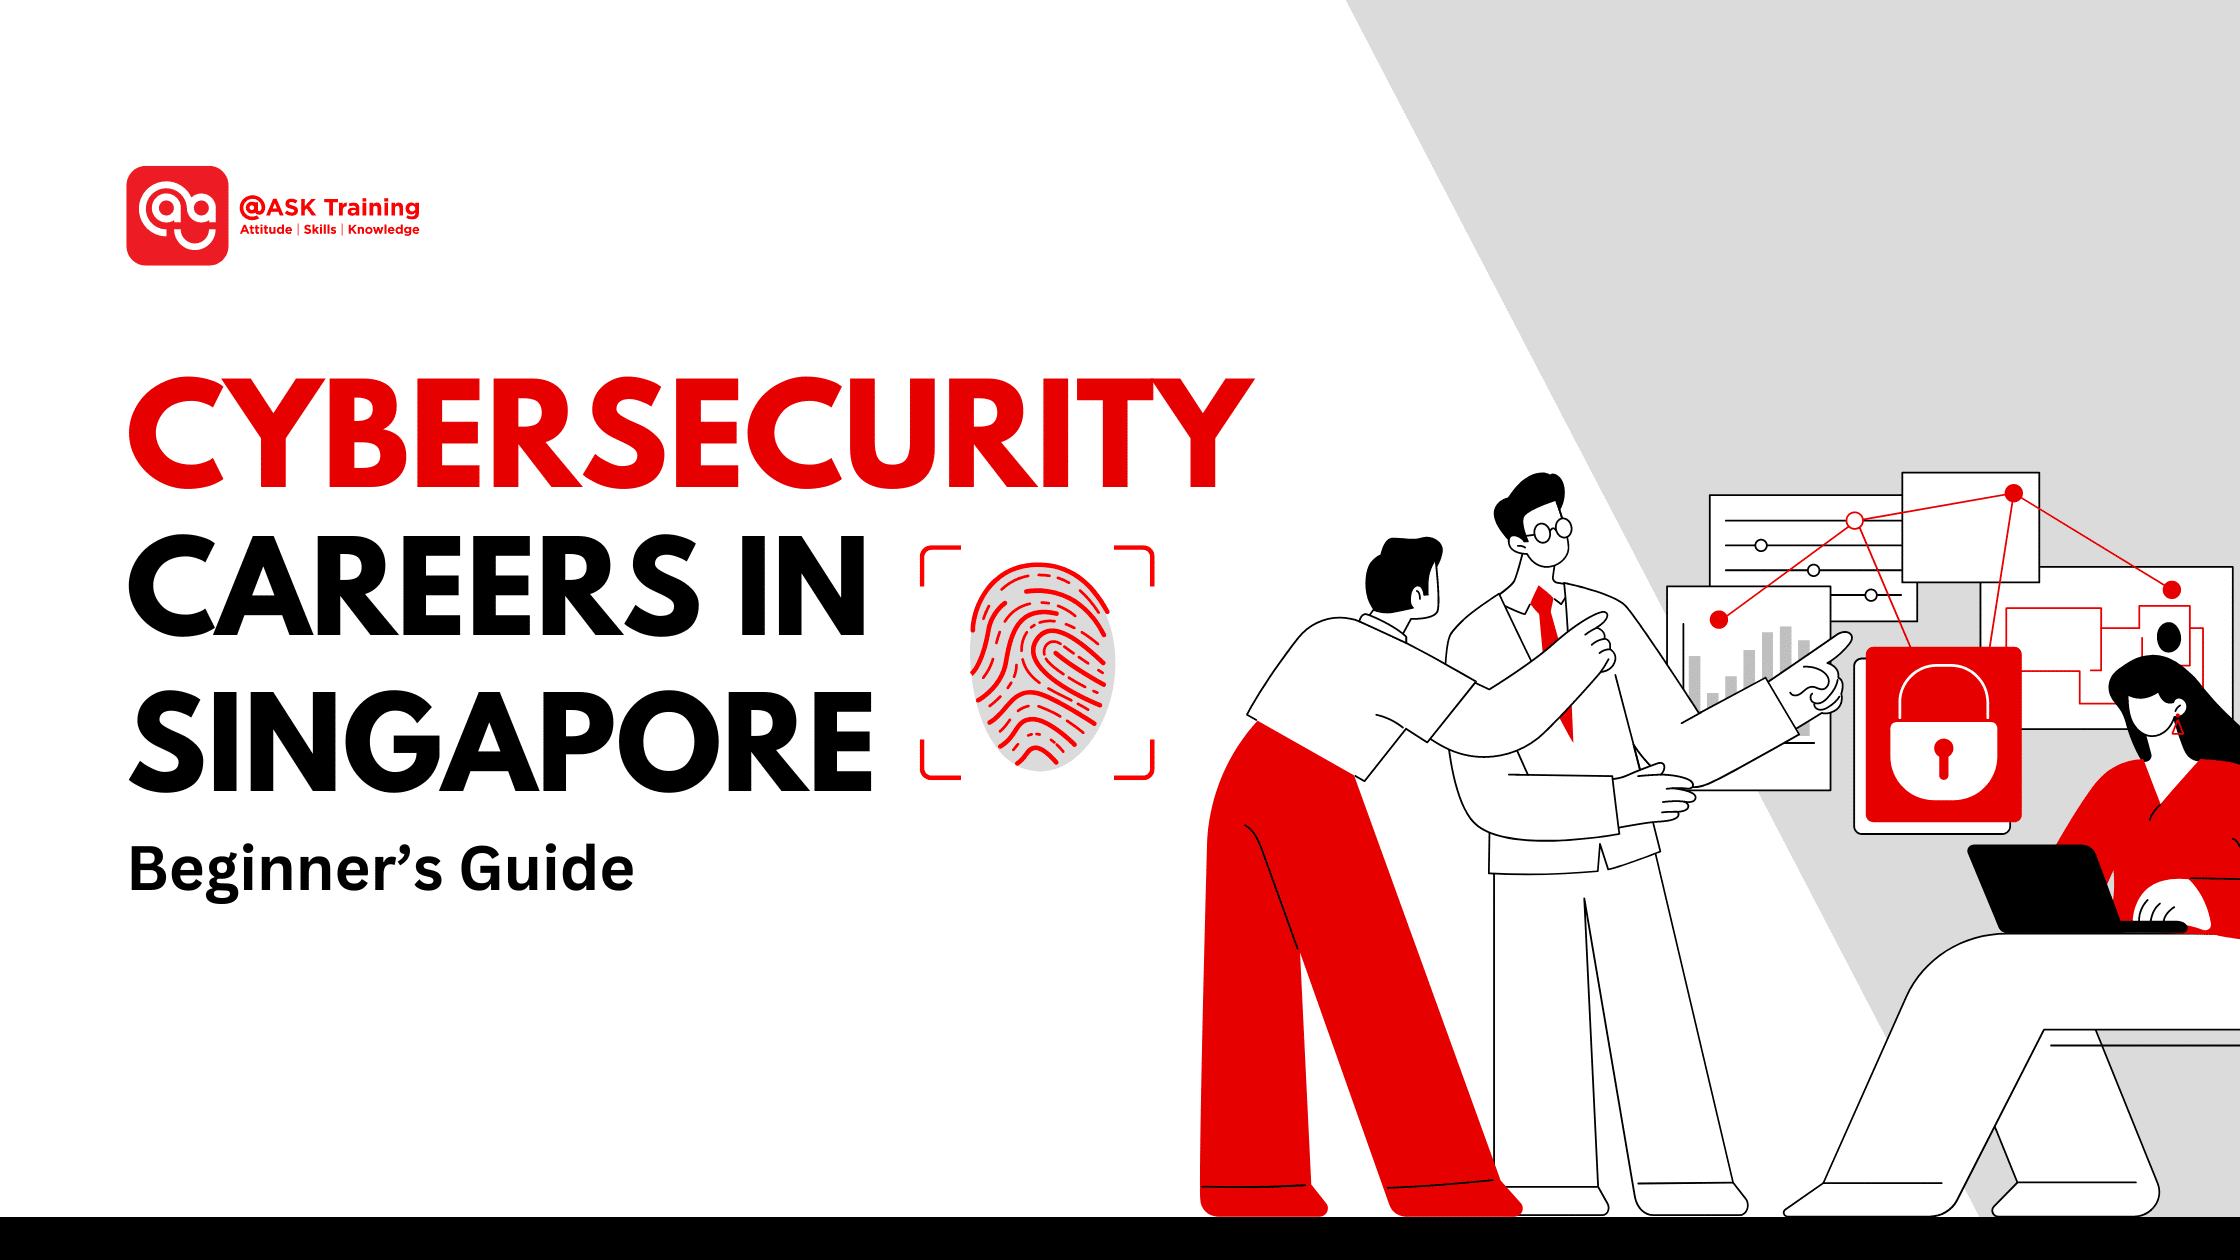 Header image of cybersecurity careers in Singapore with people discussing